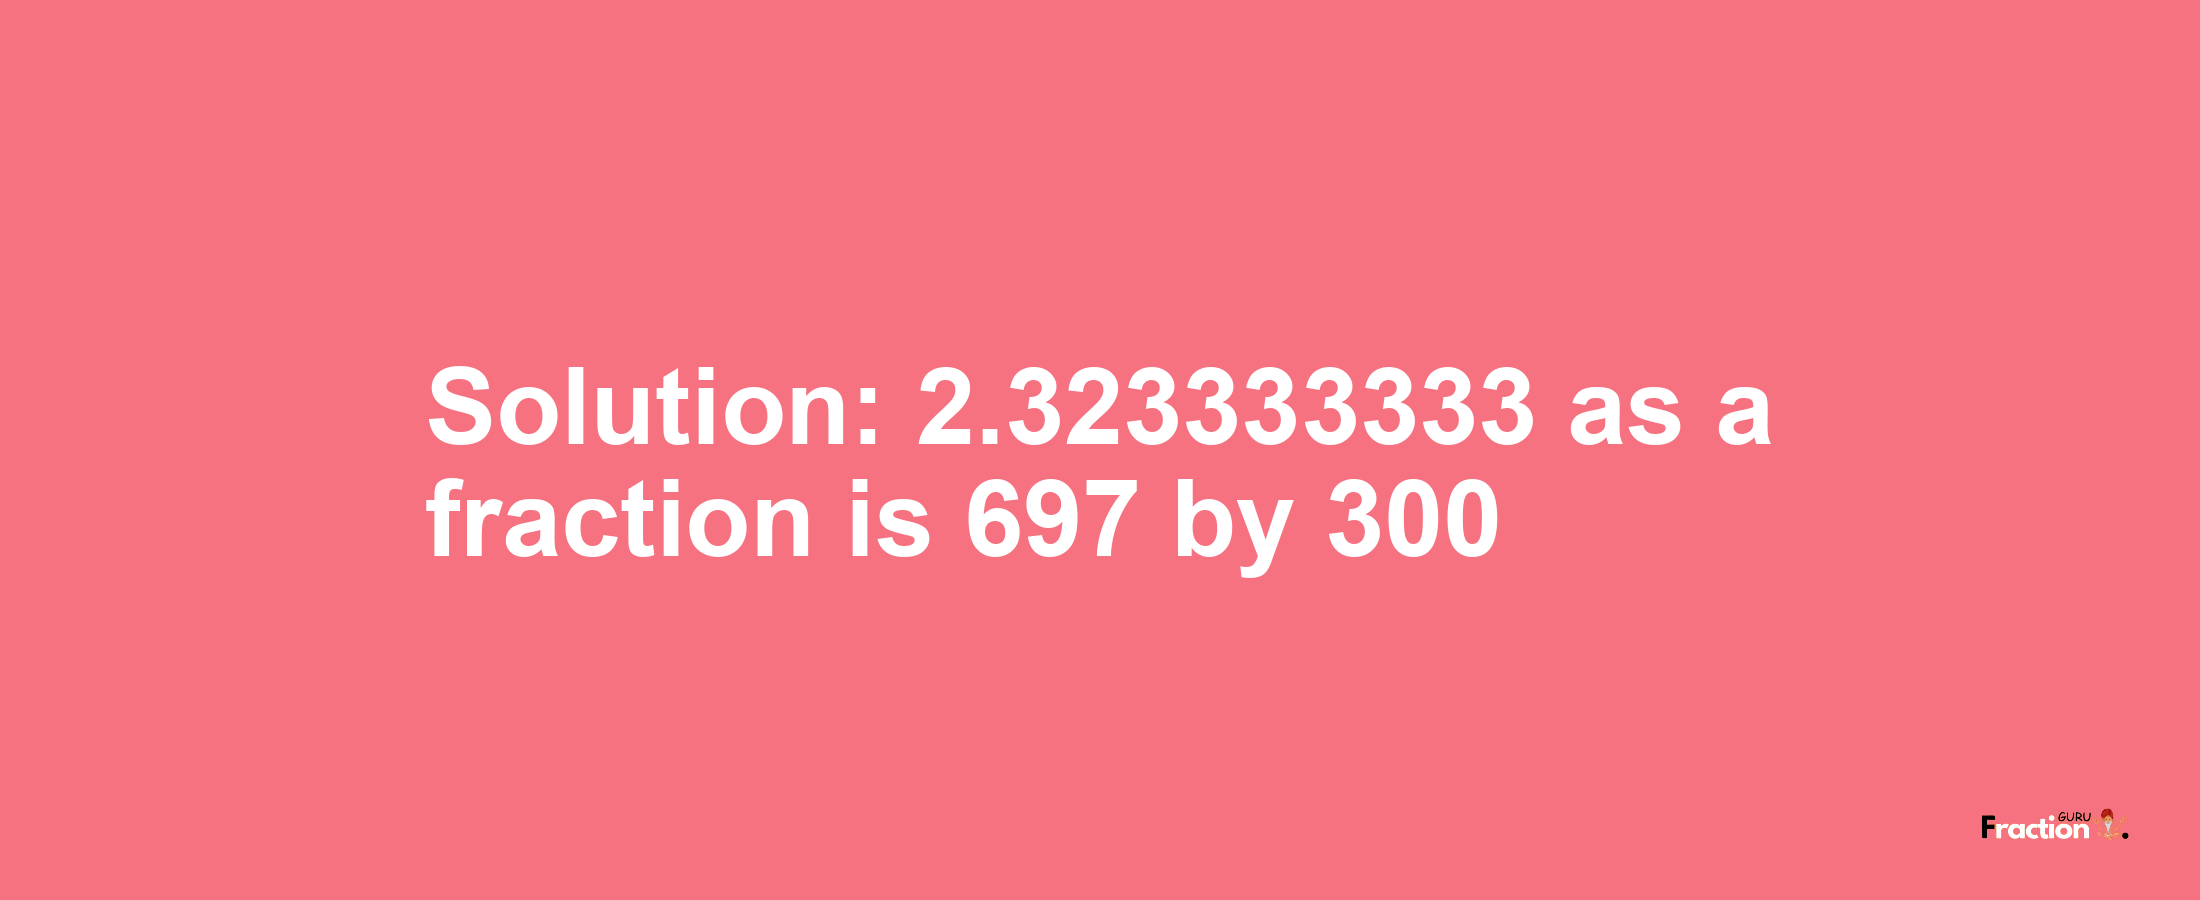 Solution:2.323333333 as a fraction is 697/300